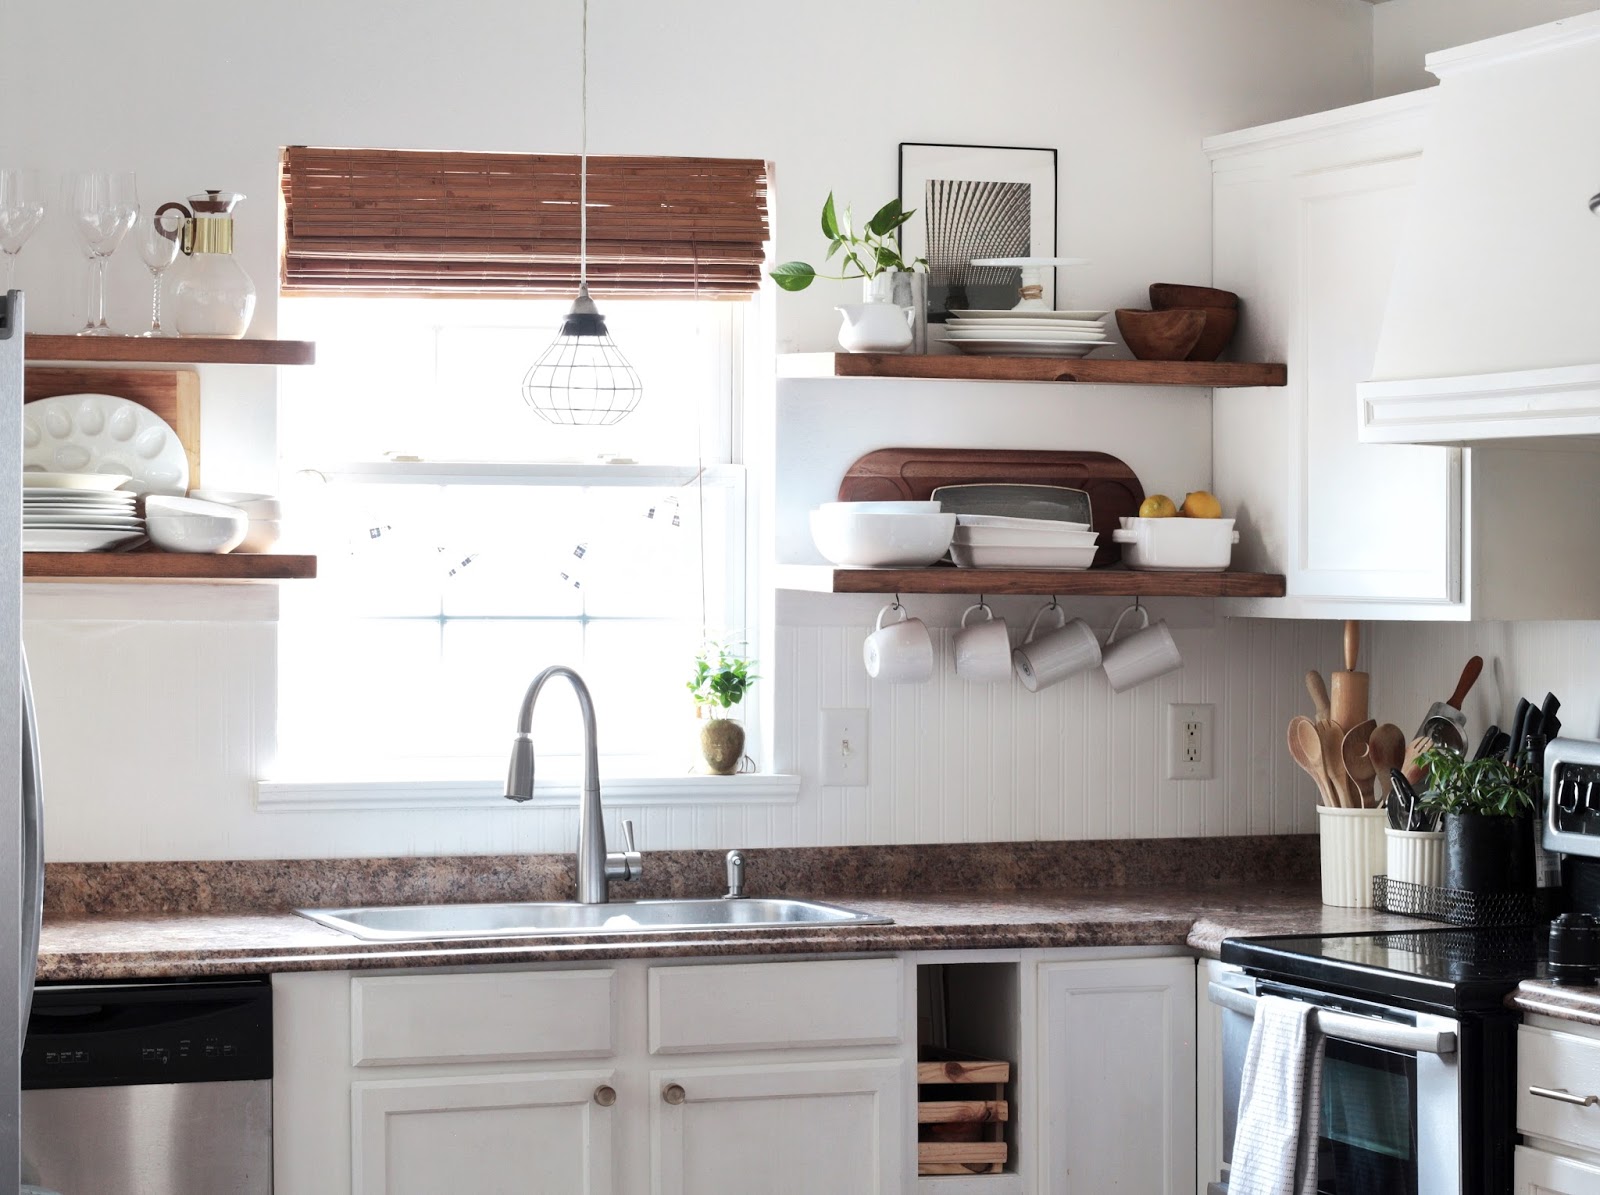 How To Install Floating Shelves With, Diy Floating Wood Shelves Kitchen